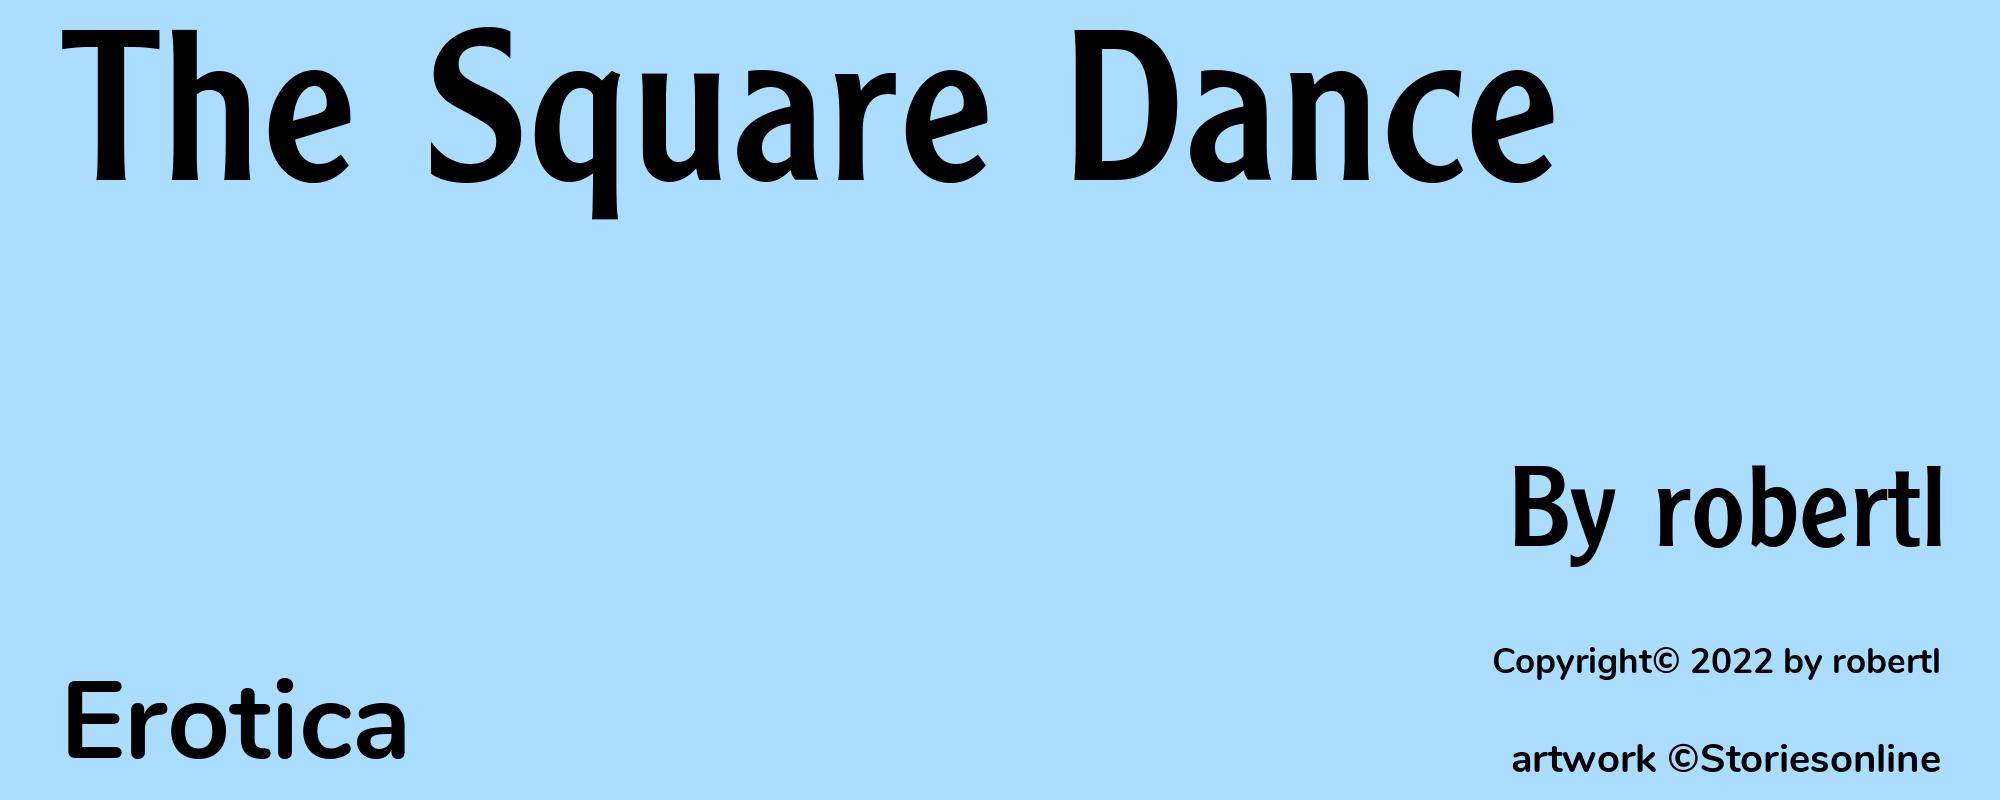 The Square Dance - Cover